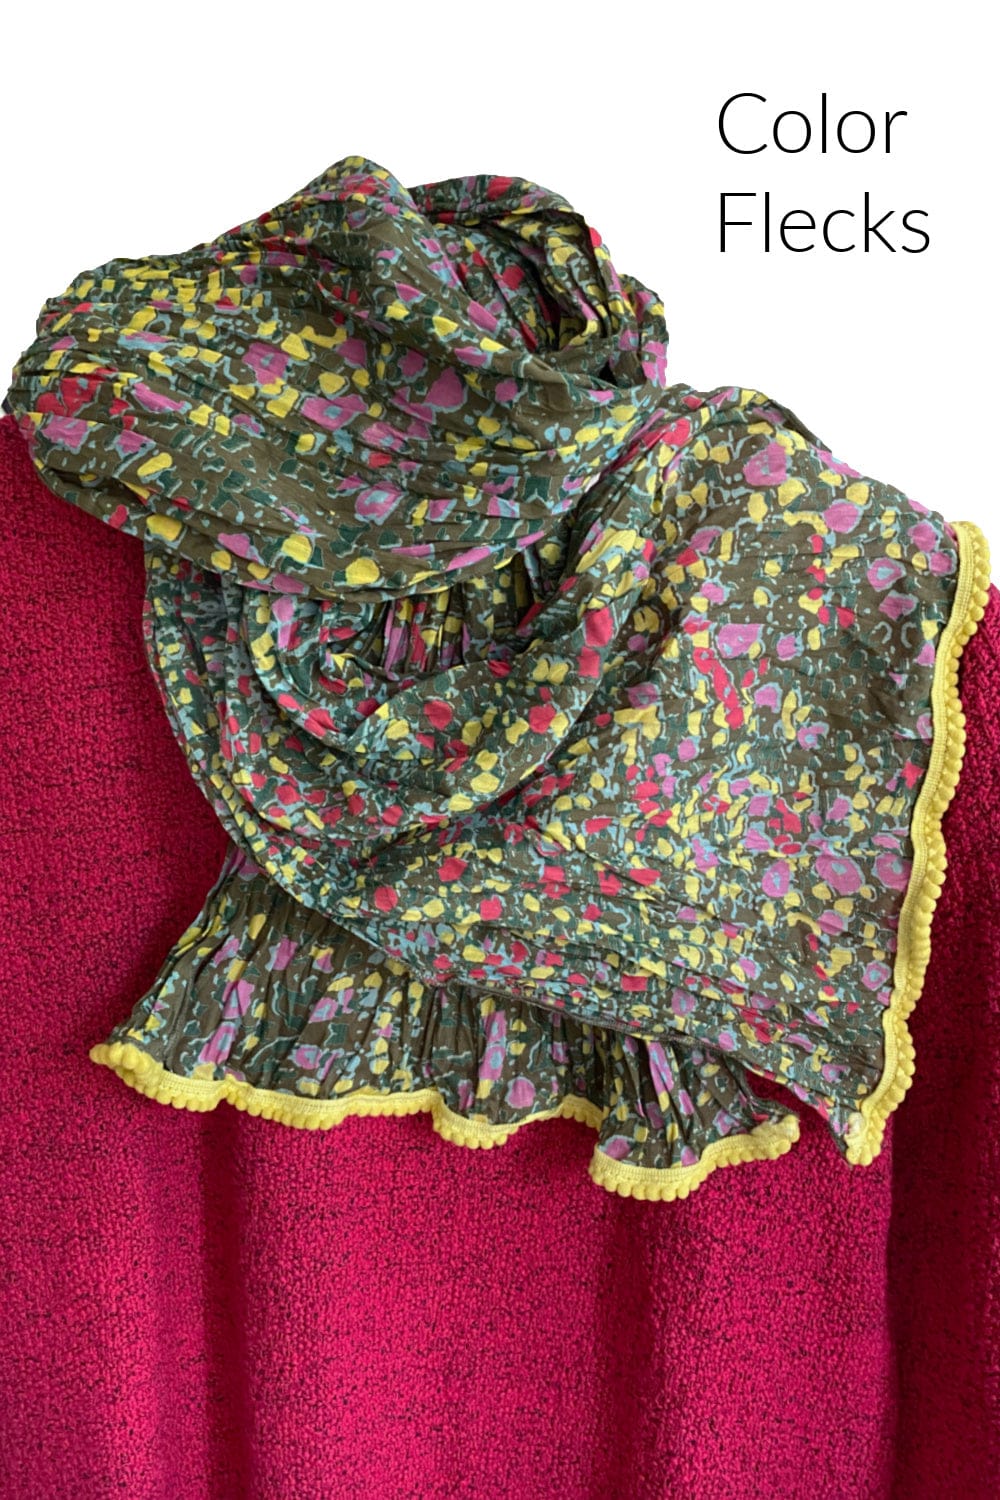 Cotton scarf with pretty color flecks on a green backgroun with yellow textured trimming.